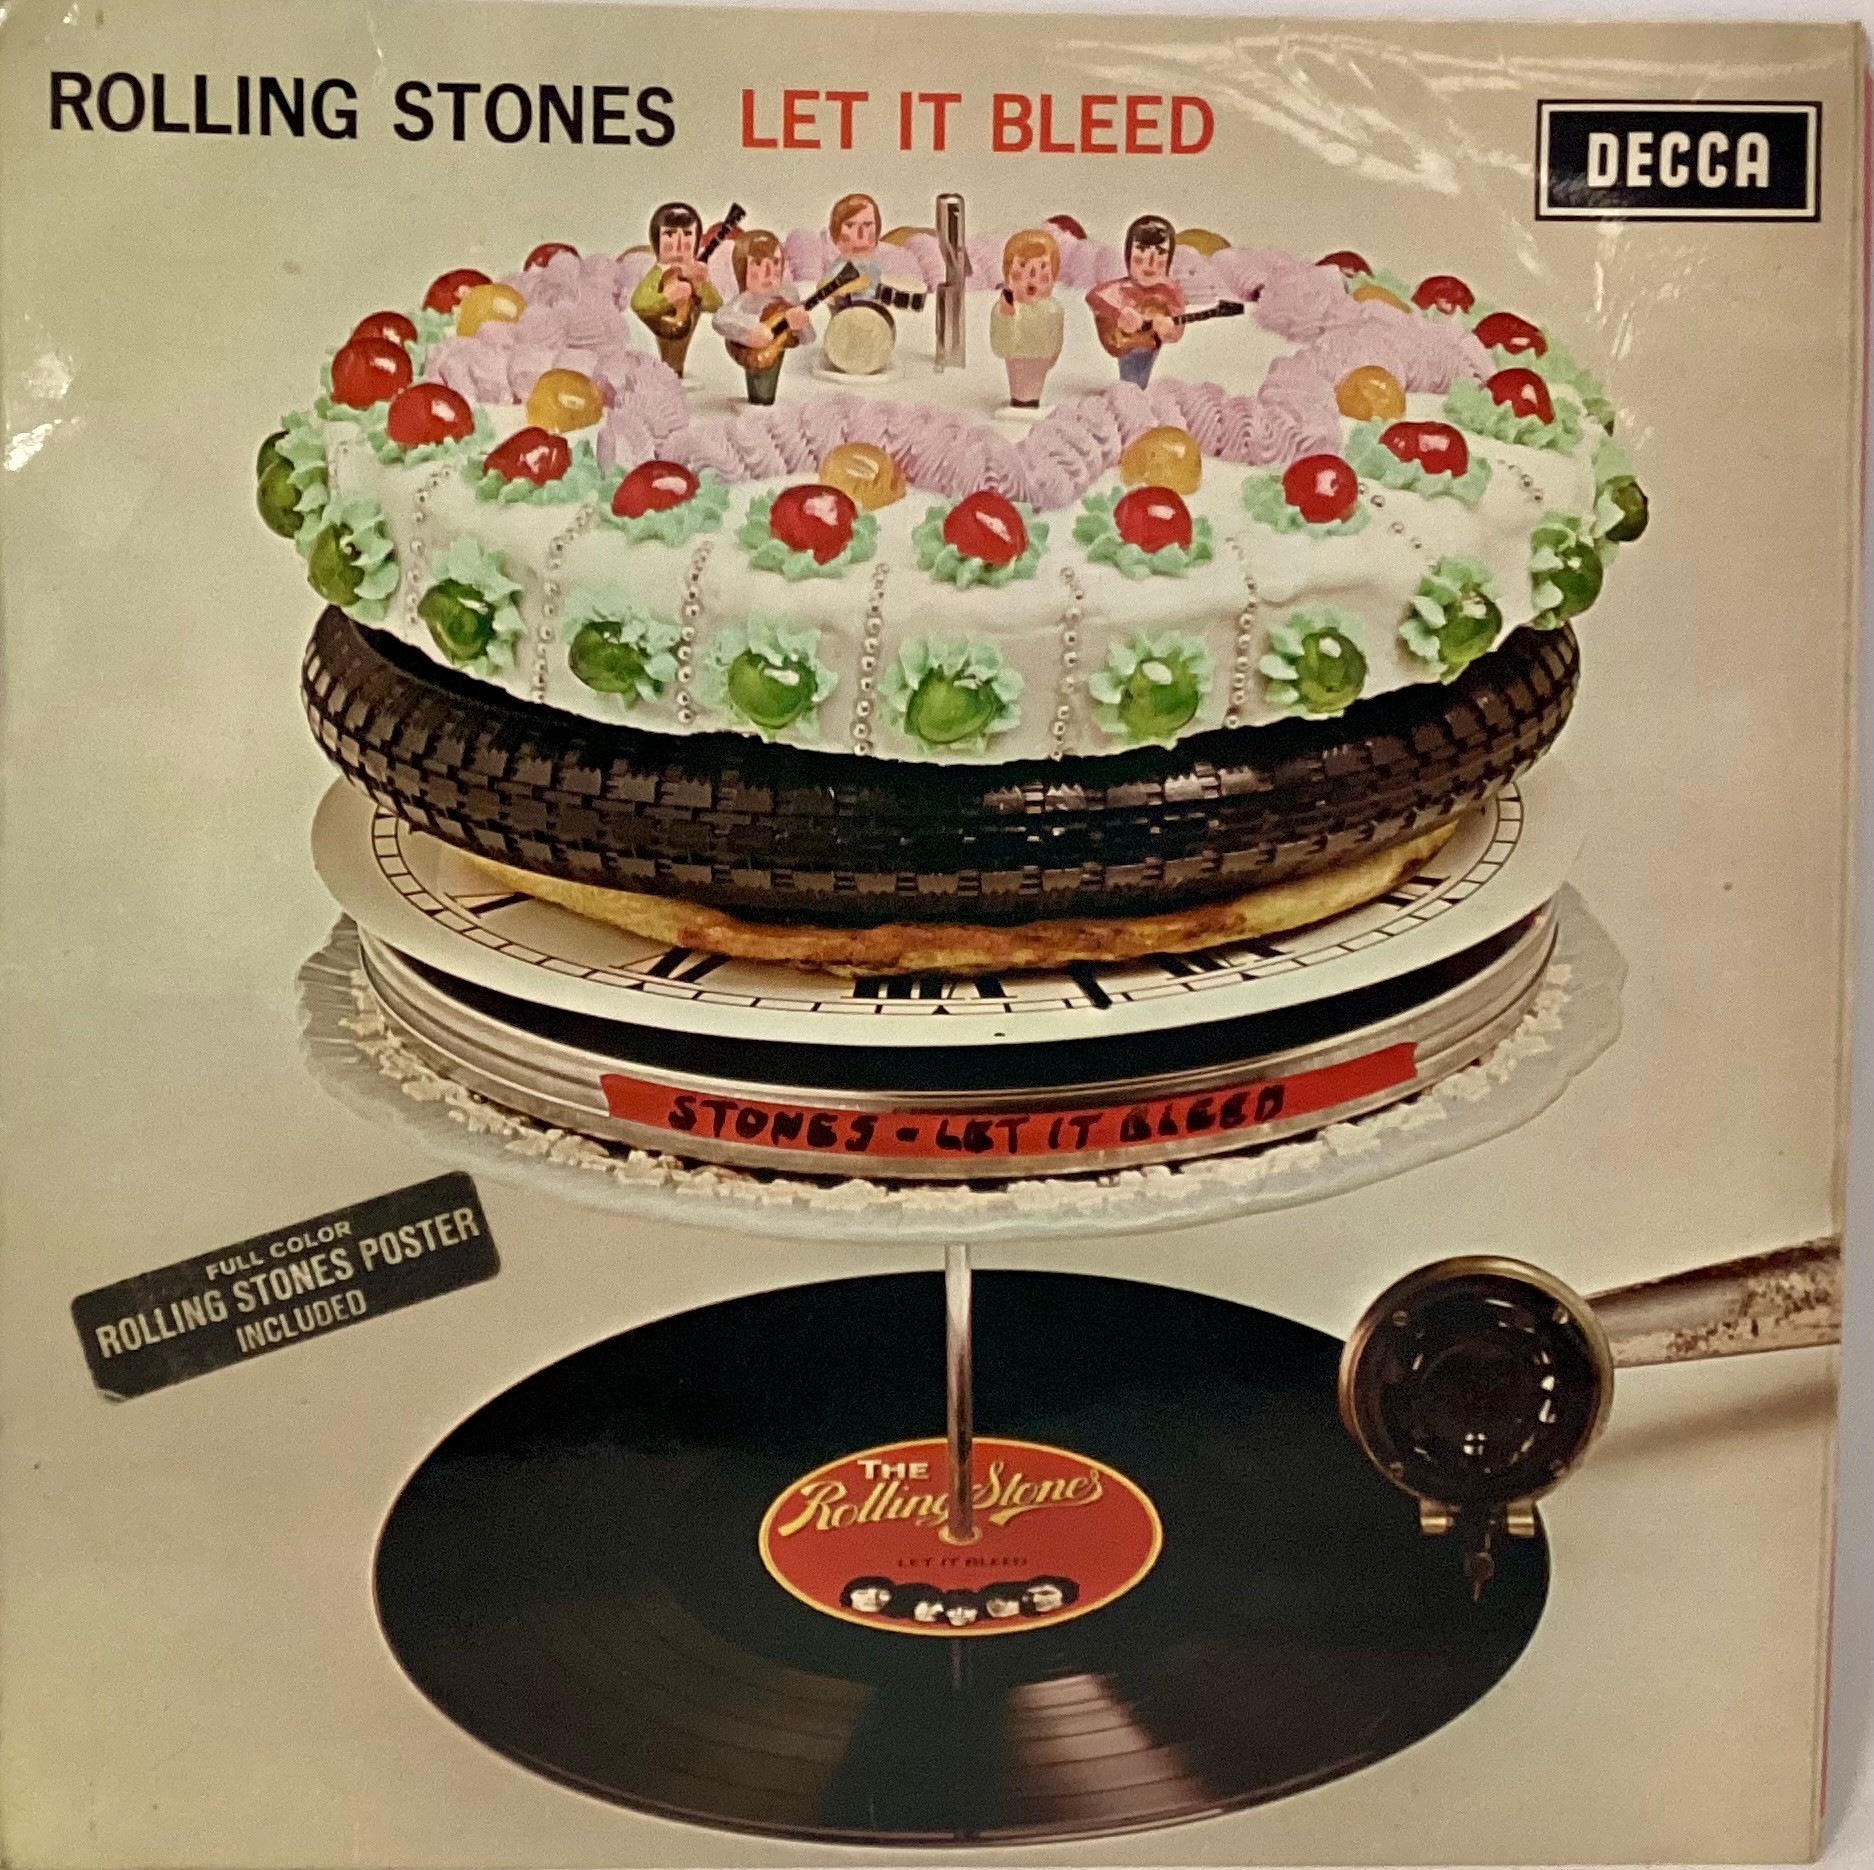 ROLLING STONES ‘LET IT BLEED’ UNBOXED DECCA LP. Great album found here with unboxed Decca label logo